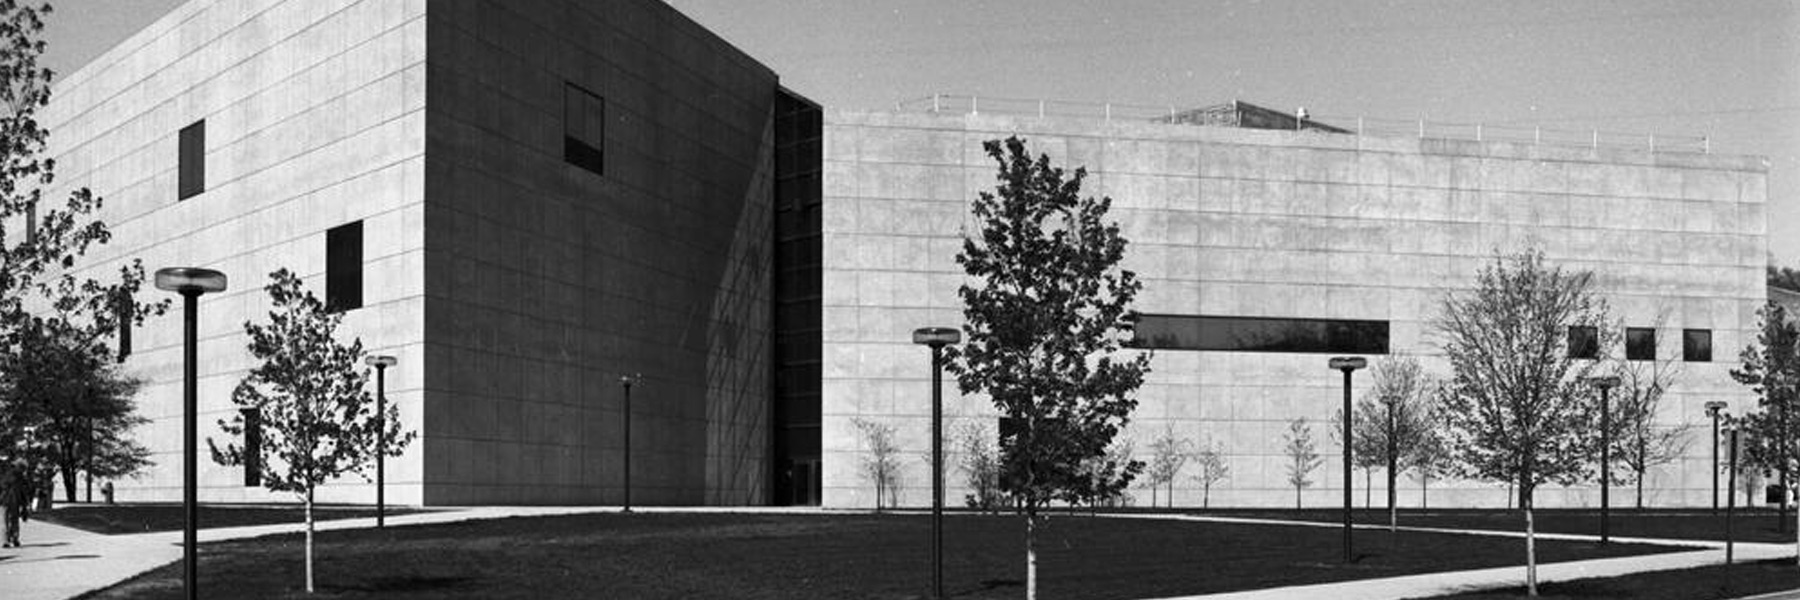 A black-and-white archive photo of the art museum's main entrance.